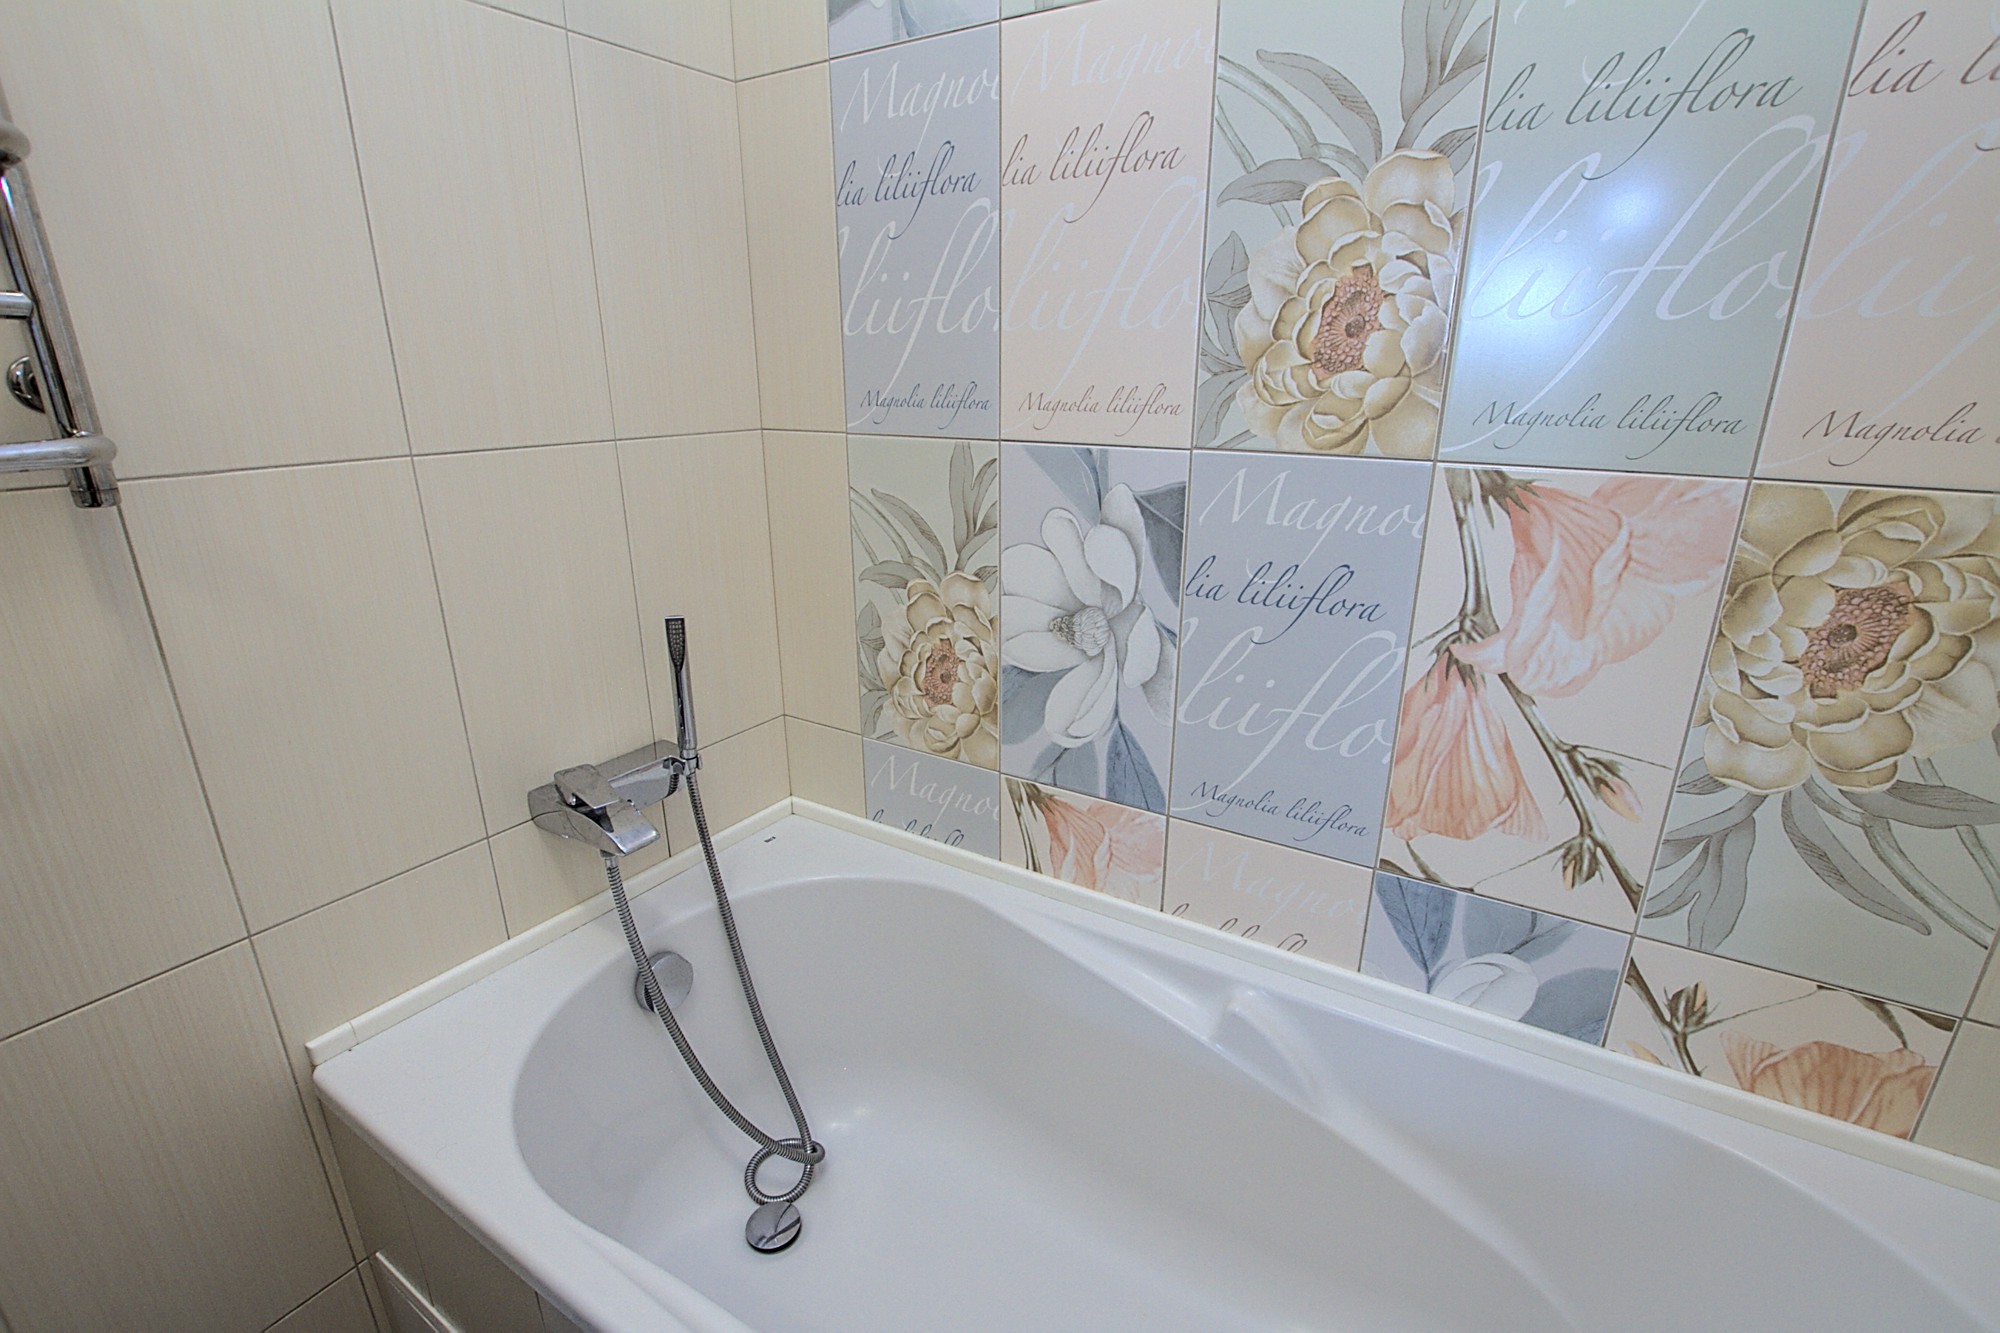 Center Penthouse is a 3 rooms apartment for rent in Chisinau, Moldova